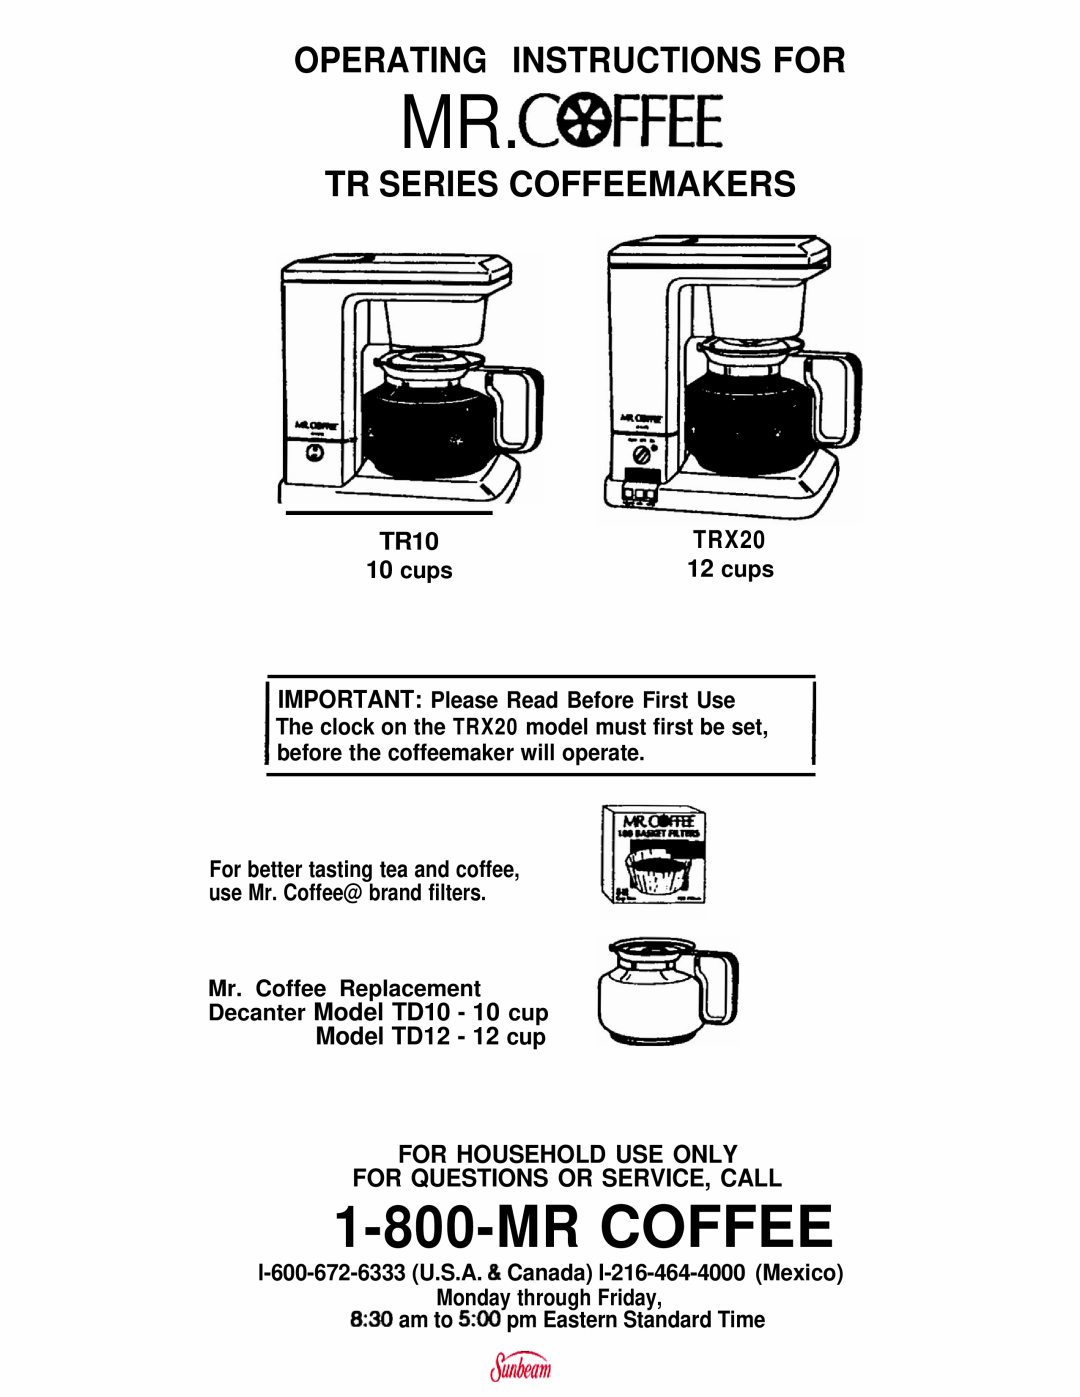 Mr. Coffee TR10 manual cups, IMPORTANT Please Read Before First Use, The clock on the TRX20 model must first be set 